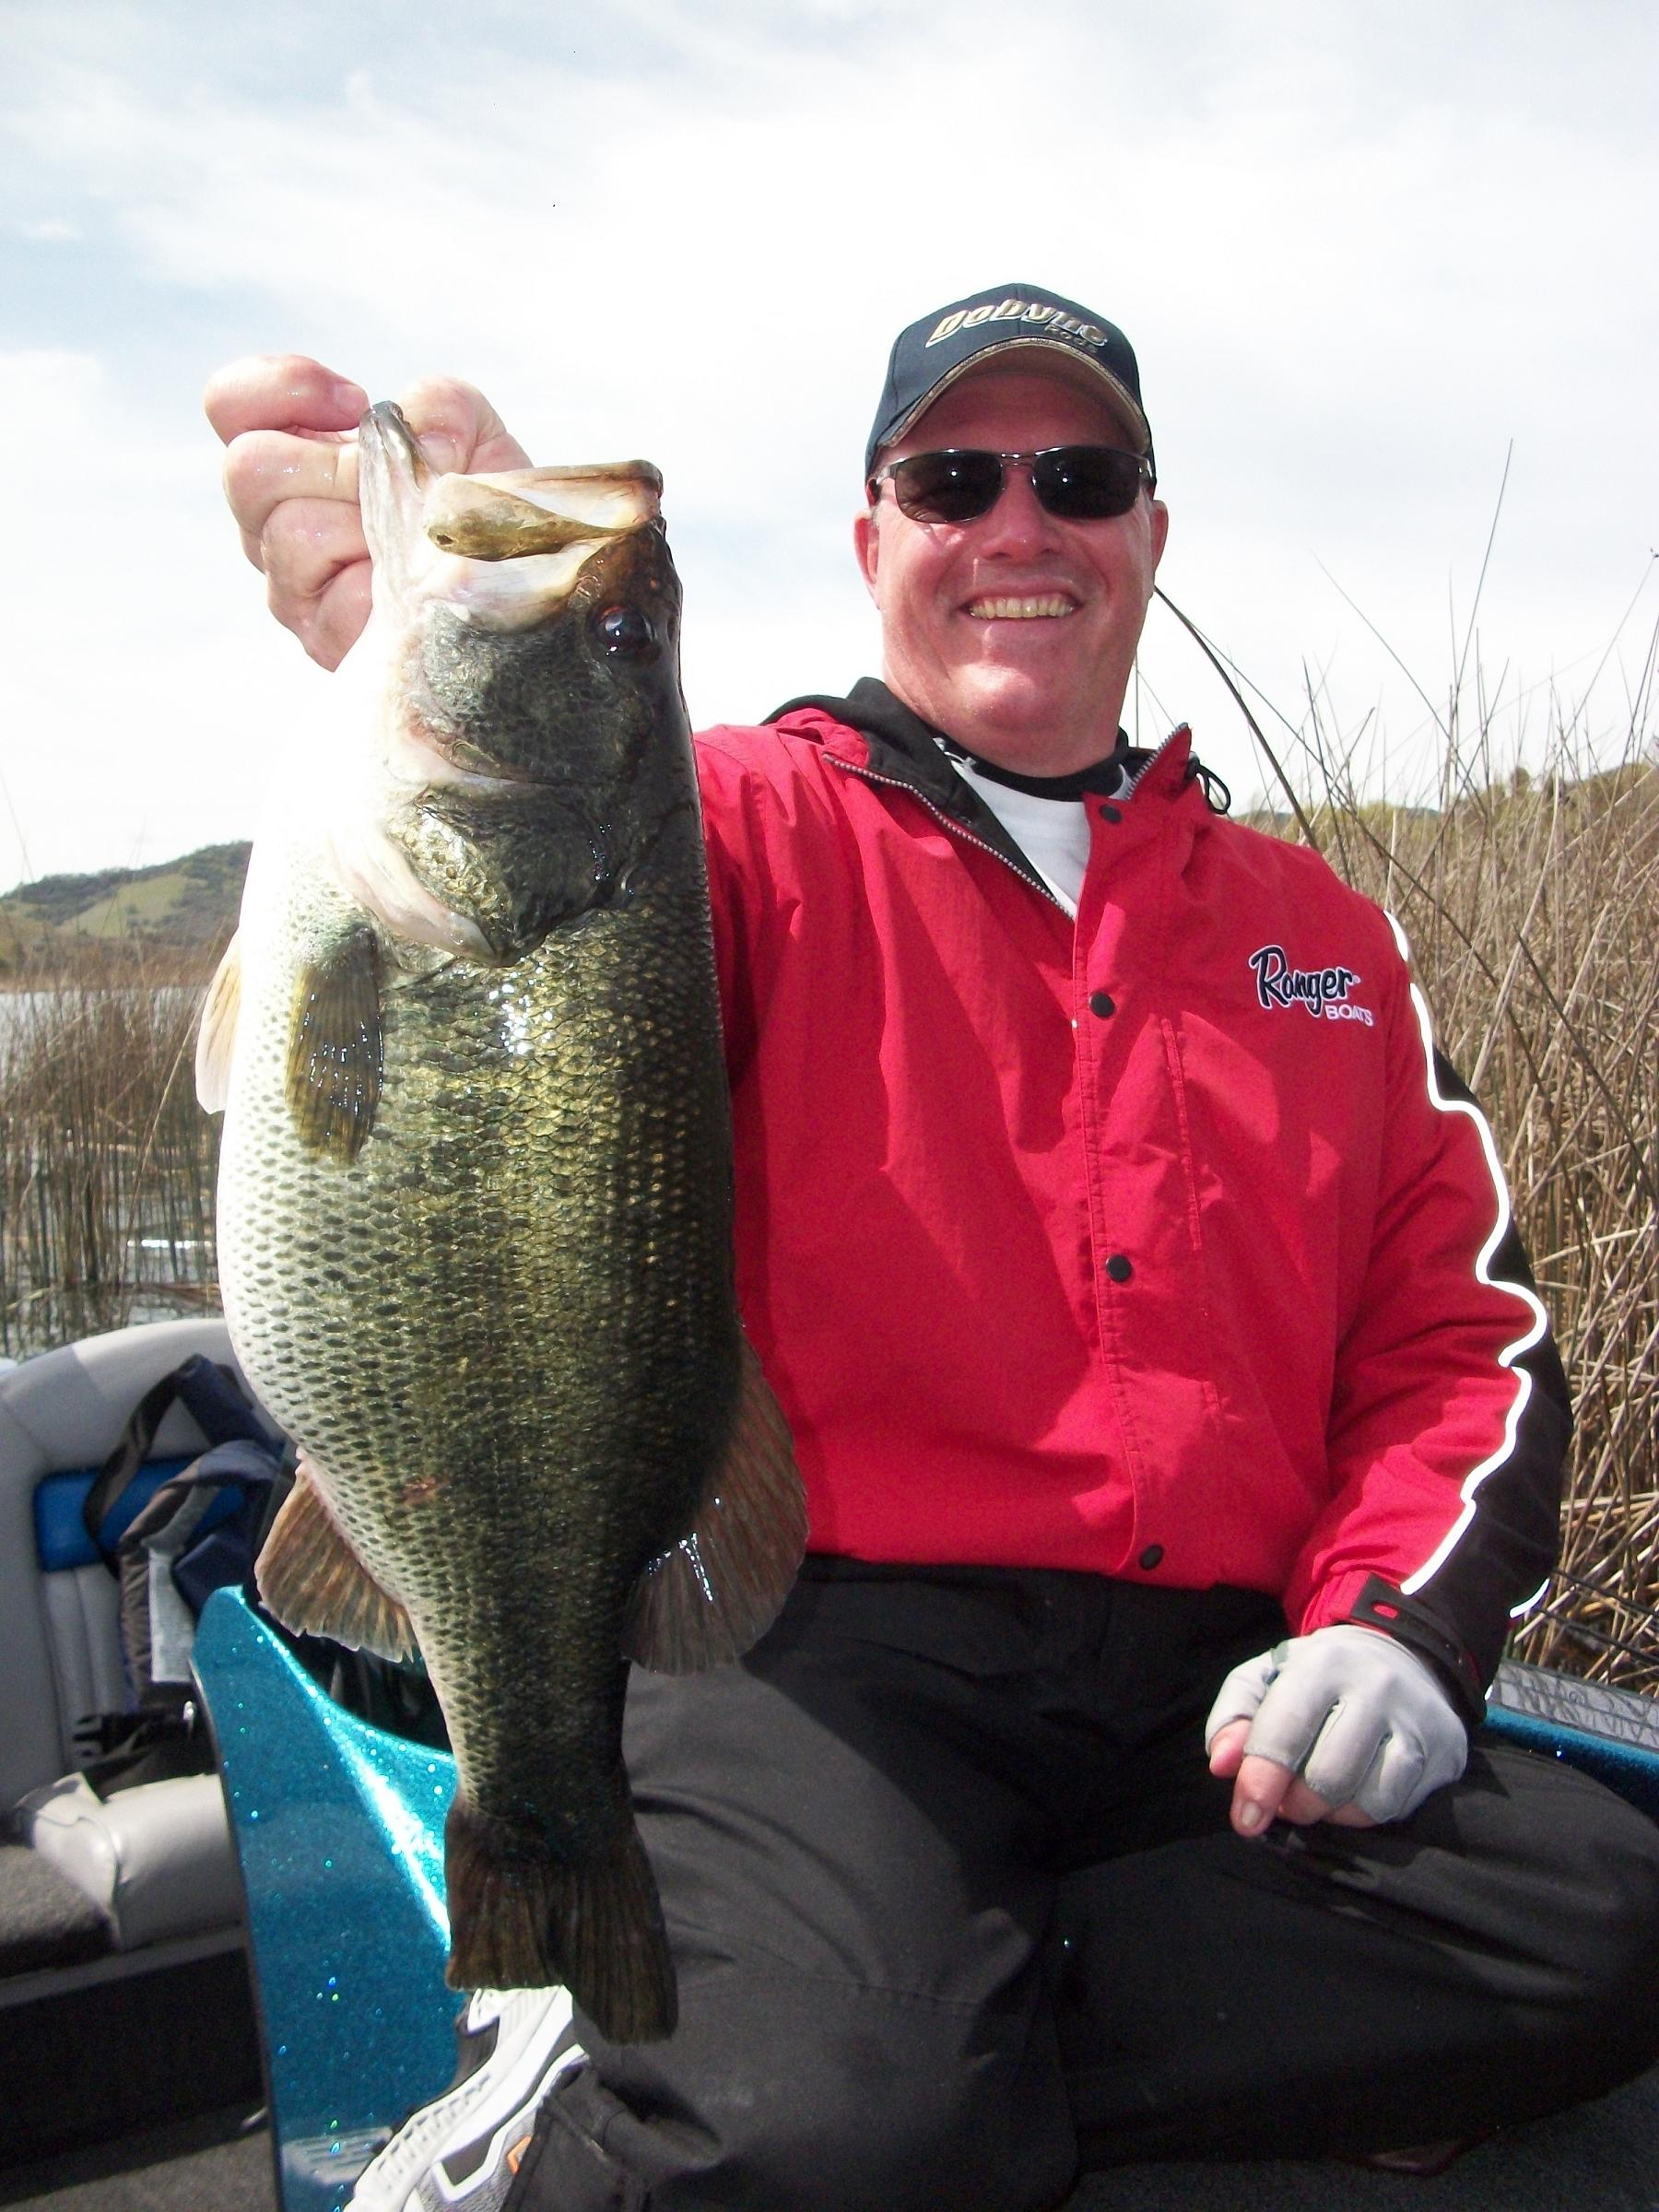 Rod, reel, lure and line you caught your PB bass on. - Page 2